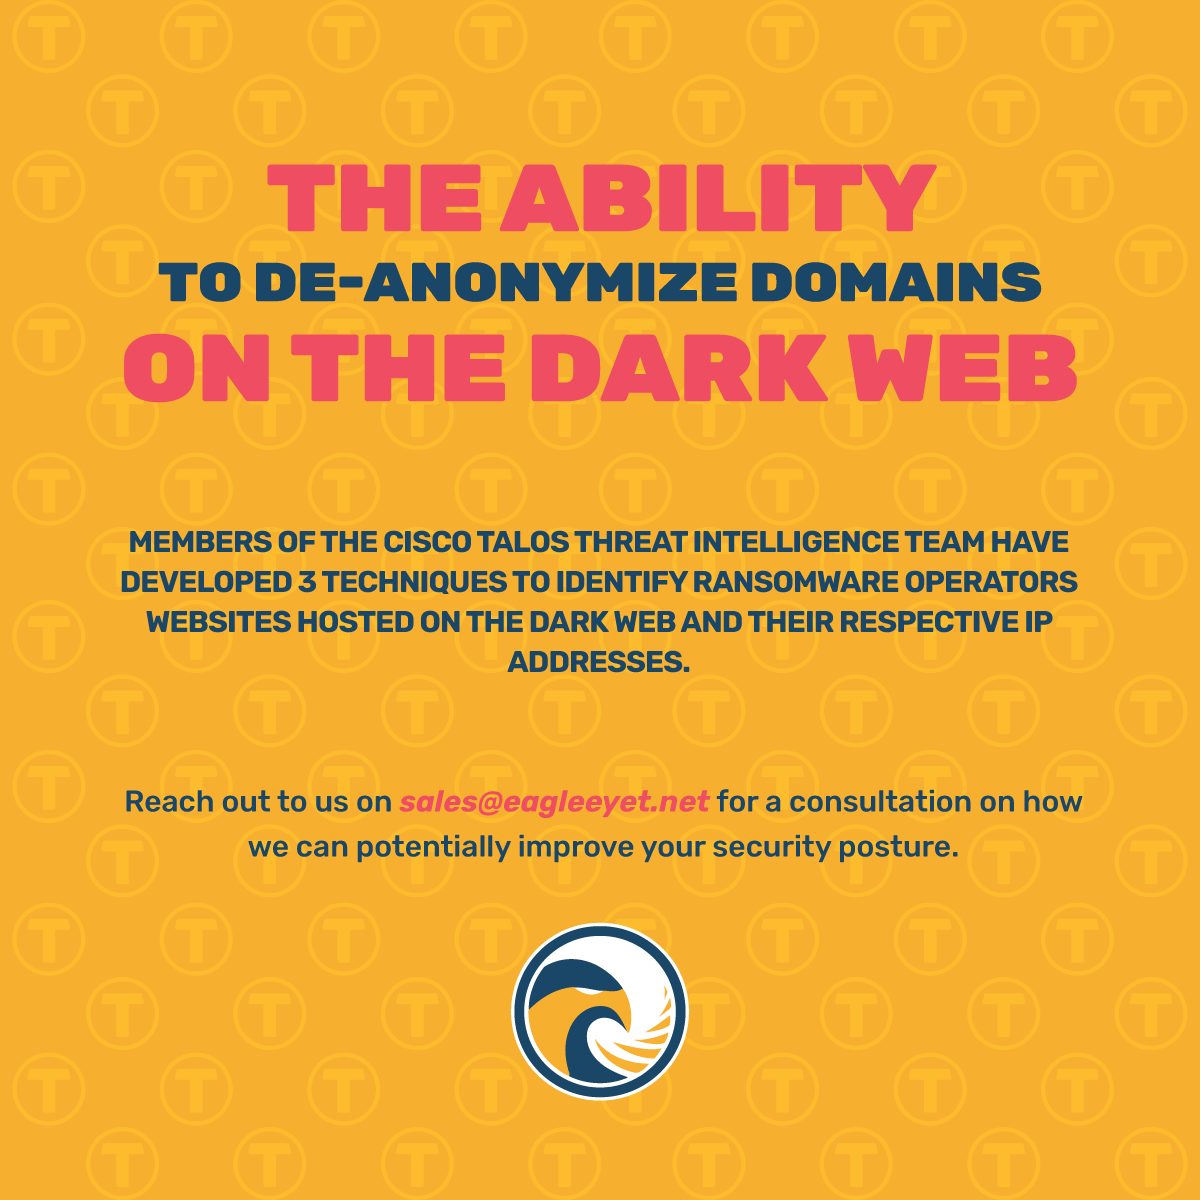 The Ability to De-Anonymize Domains on the Dark Web